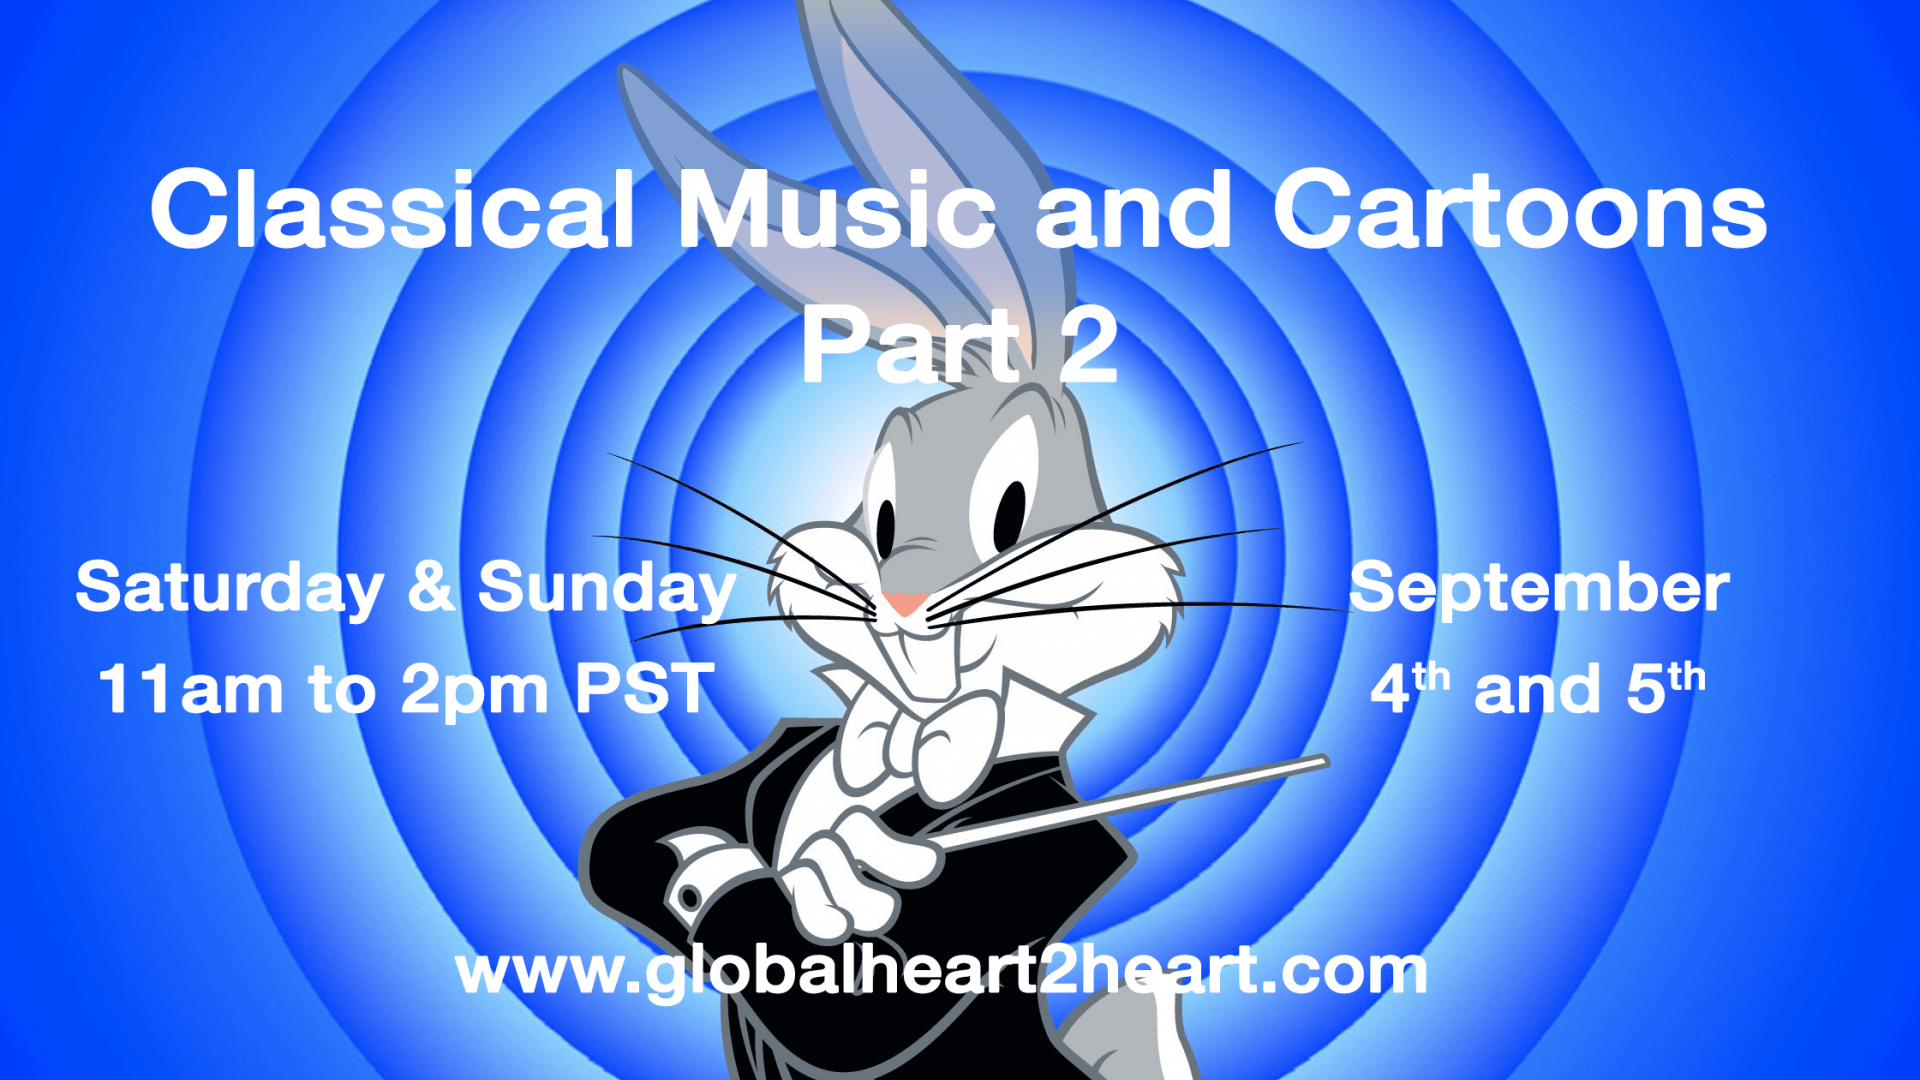 Classical Music and Cartoons Part 2 this Weekend Sept 4th and 5th